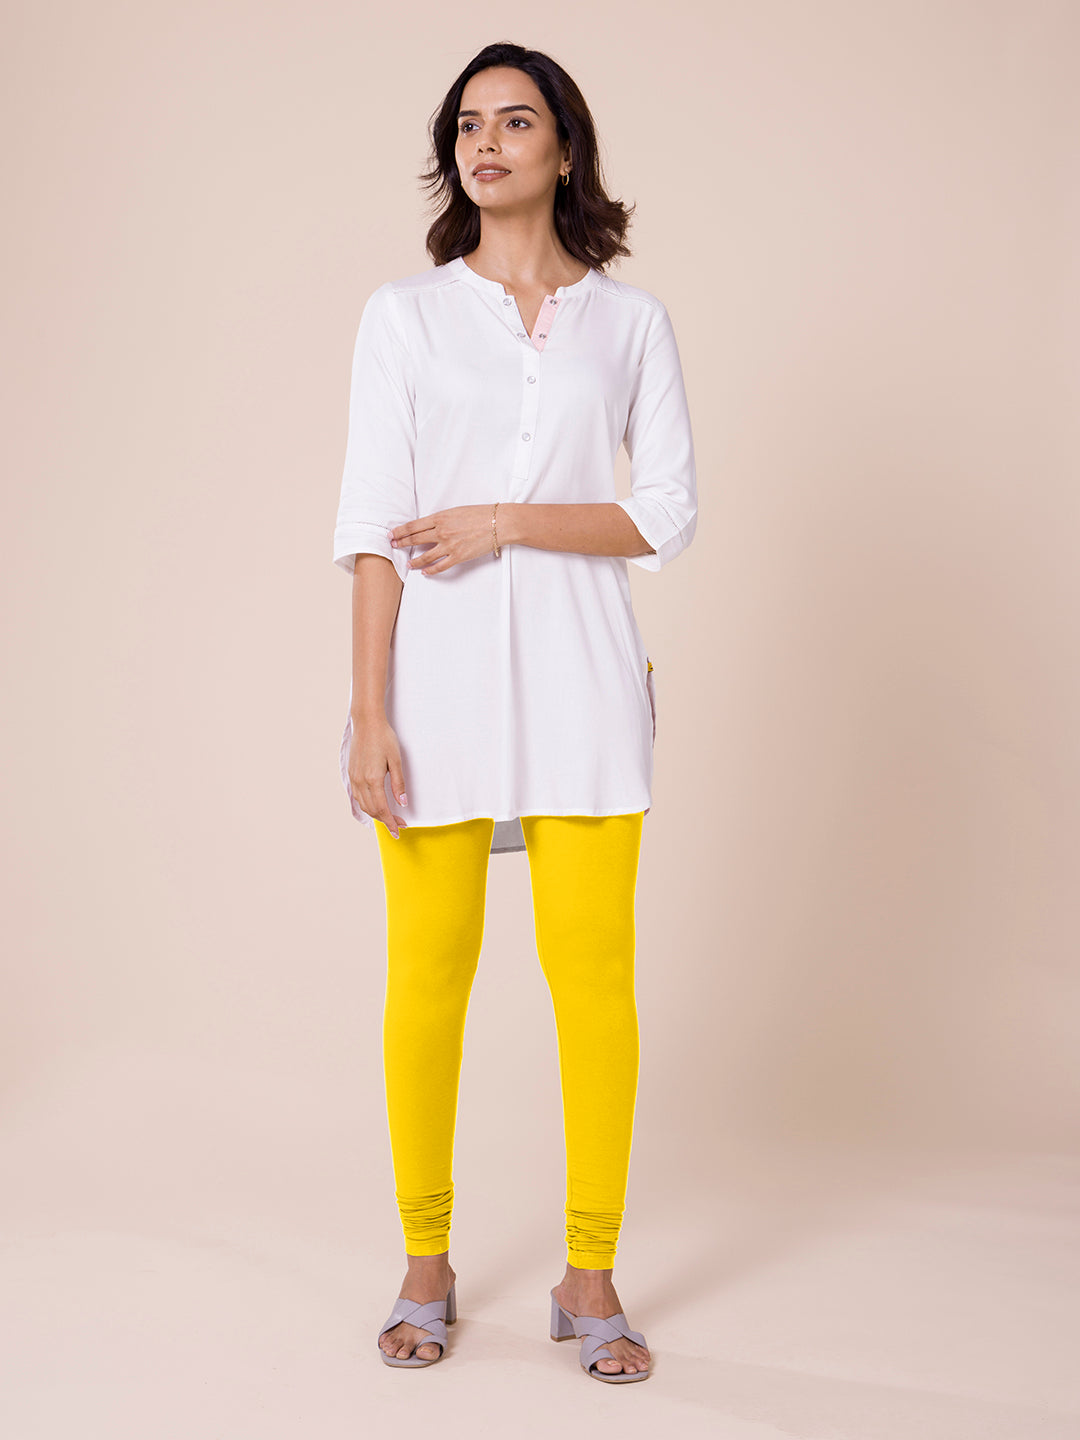 Yellow kurti and white legging to look fresh for summers. | Yellow kurti,  Dress, Dresses with sleeves